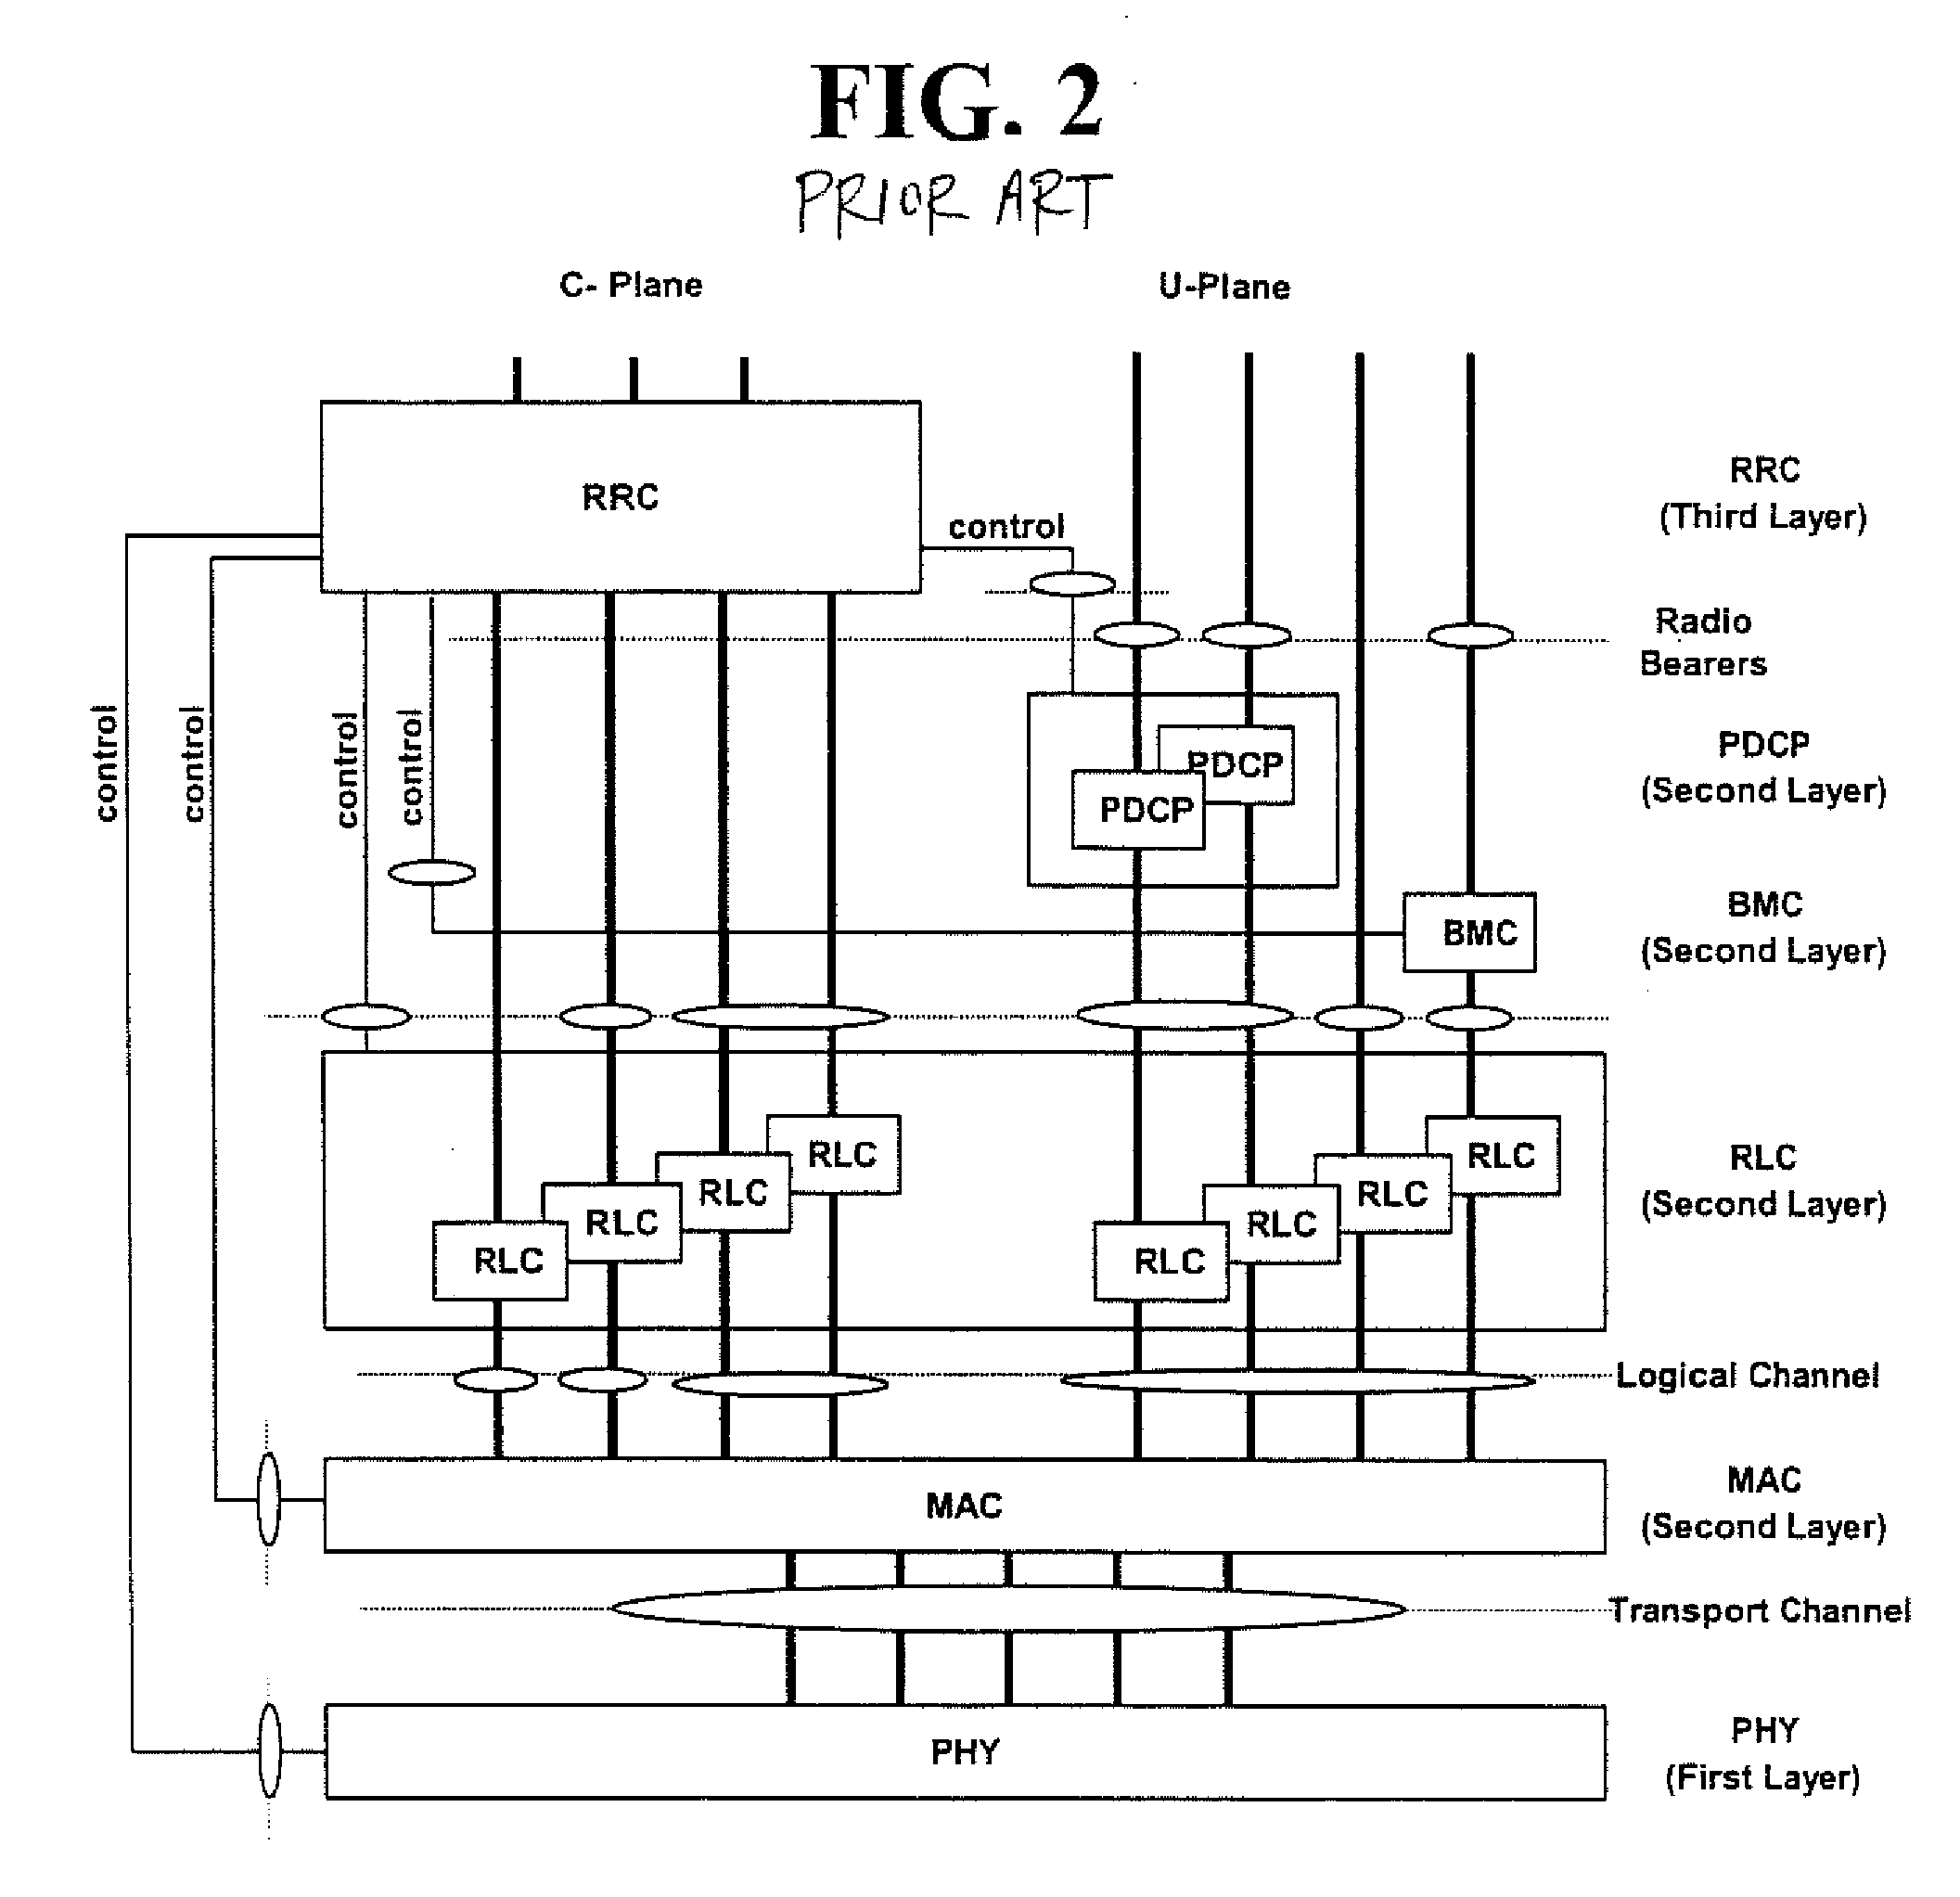 Radio communication scheme for providing multimedia broadcast and multicast services (MBMS)